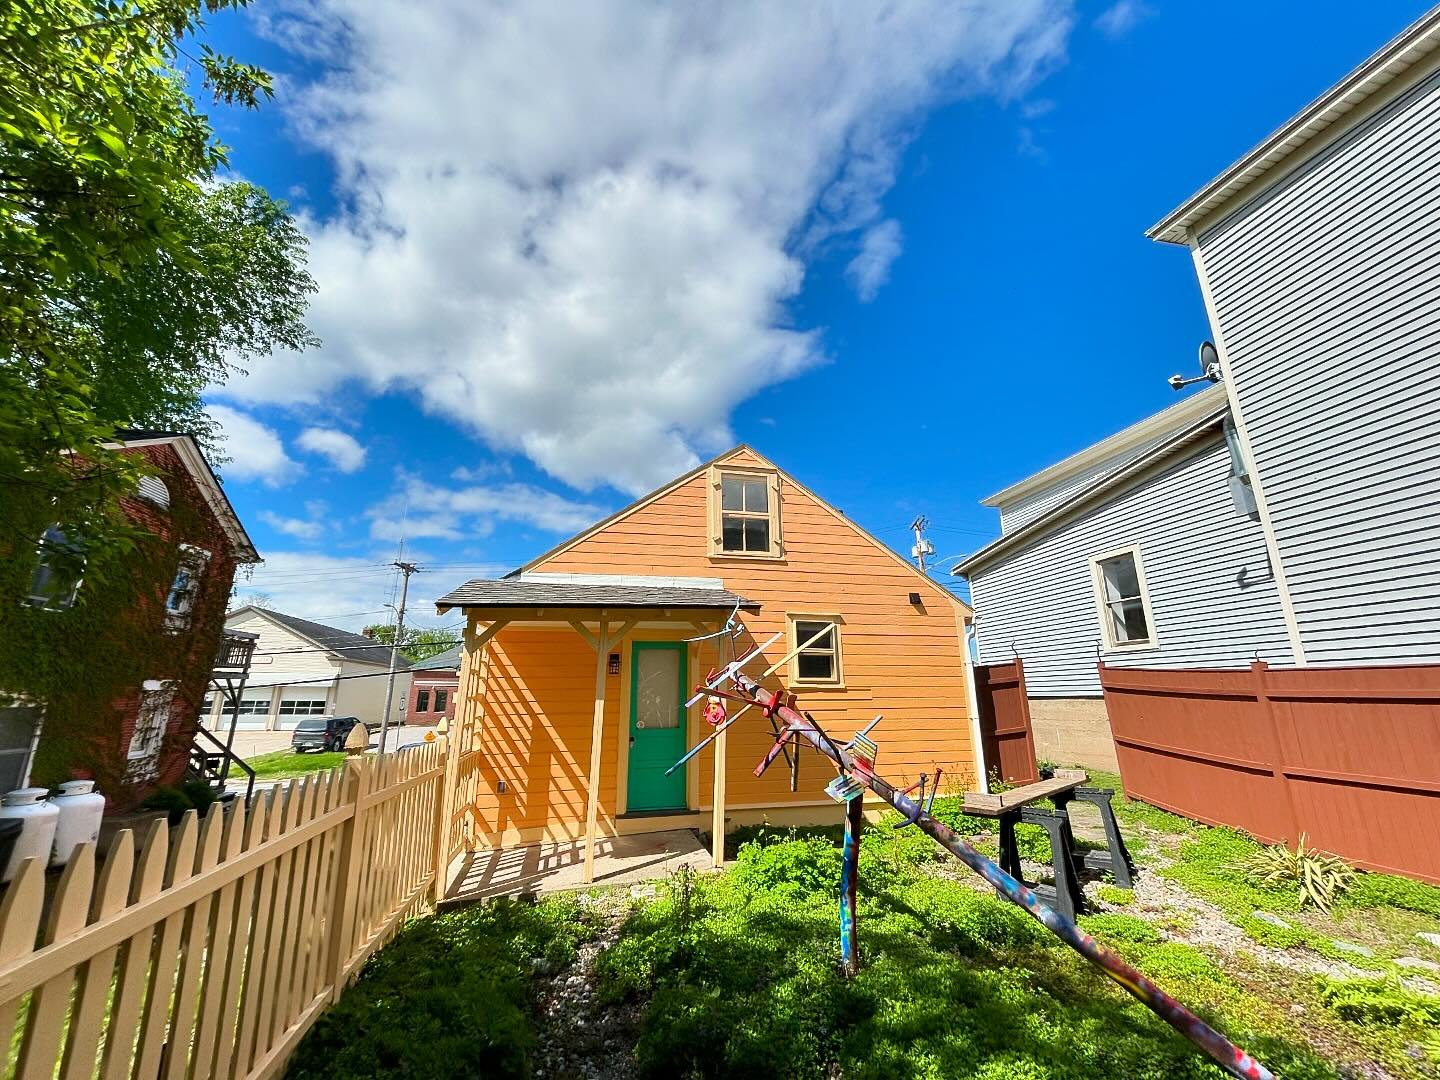 📍37 Green St., Vergennes VT, a small commercially zoned building in downtown Vergennes is available for RENT starting ~mid-June.

Please DM for further info or to schedule an appointment for viewing.
-
Image: the back garden at 37 Green Street.
-
-
